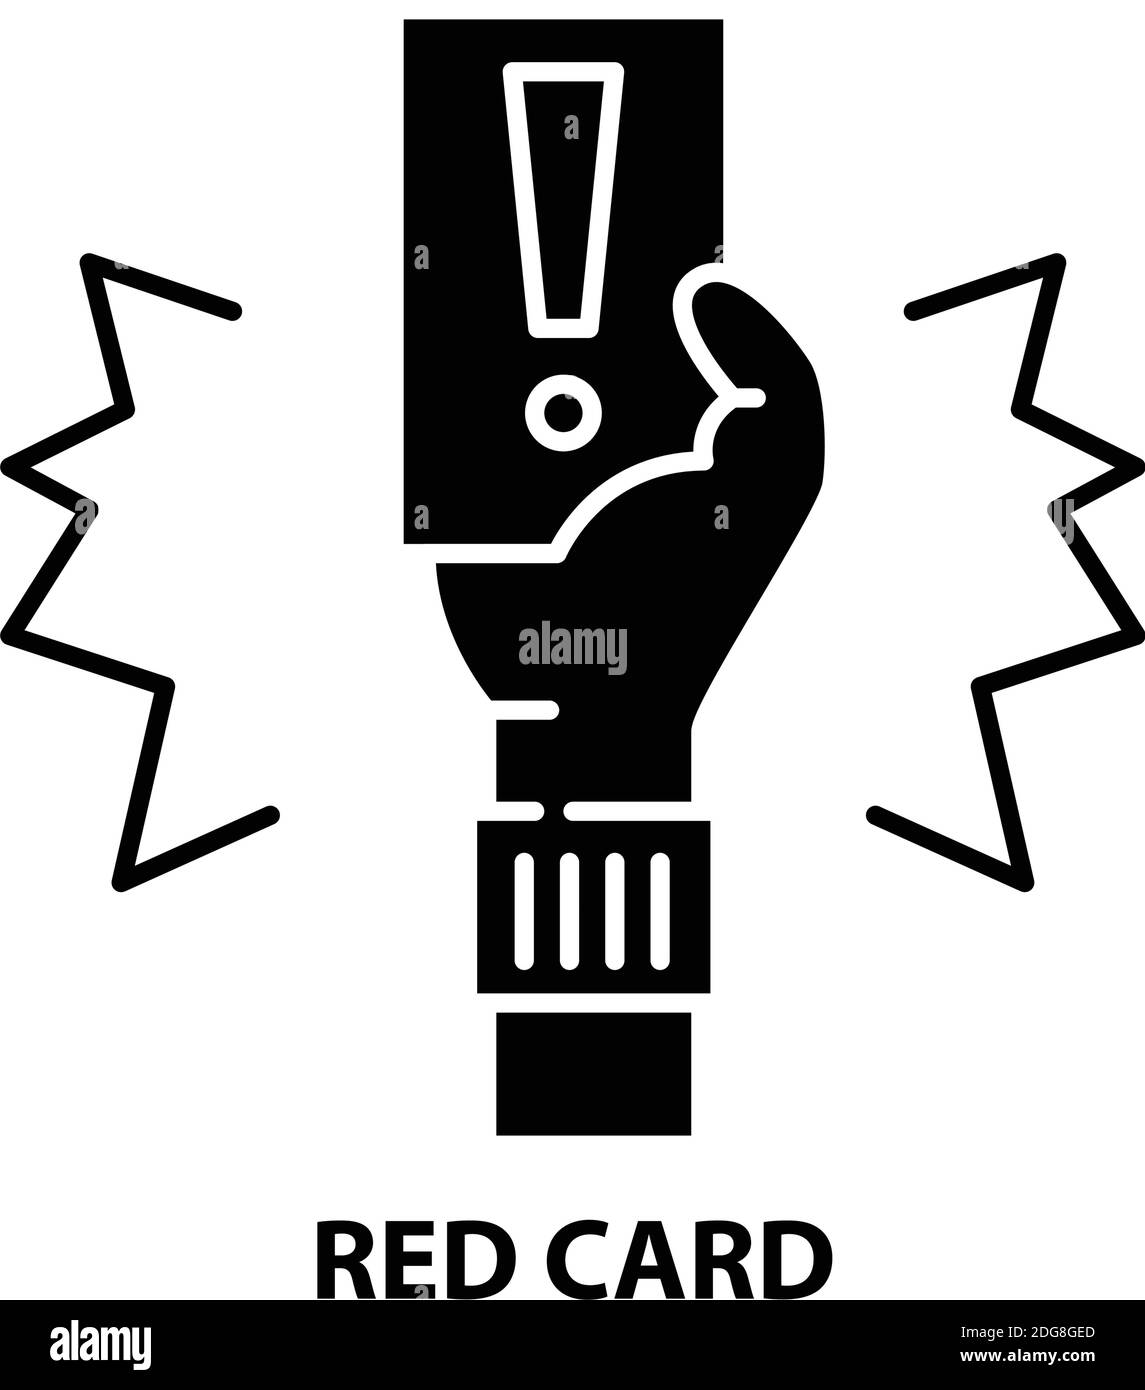 Black Red Card: Over 258,221 Royalty-Free Licensable Stock Photos